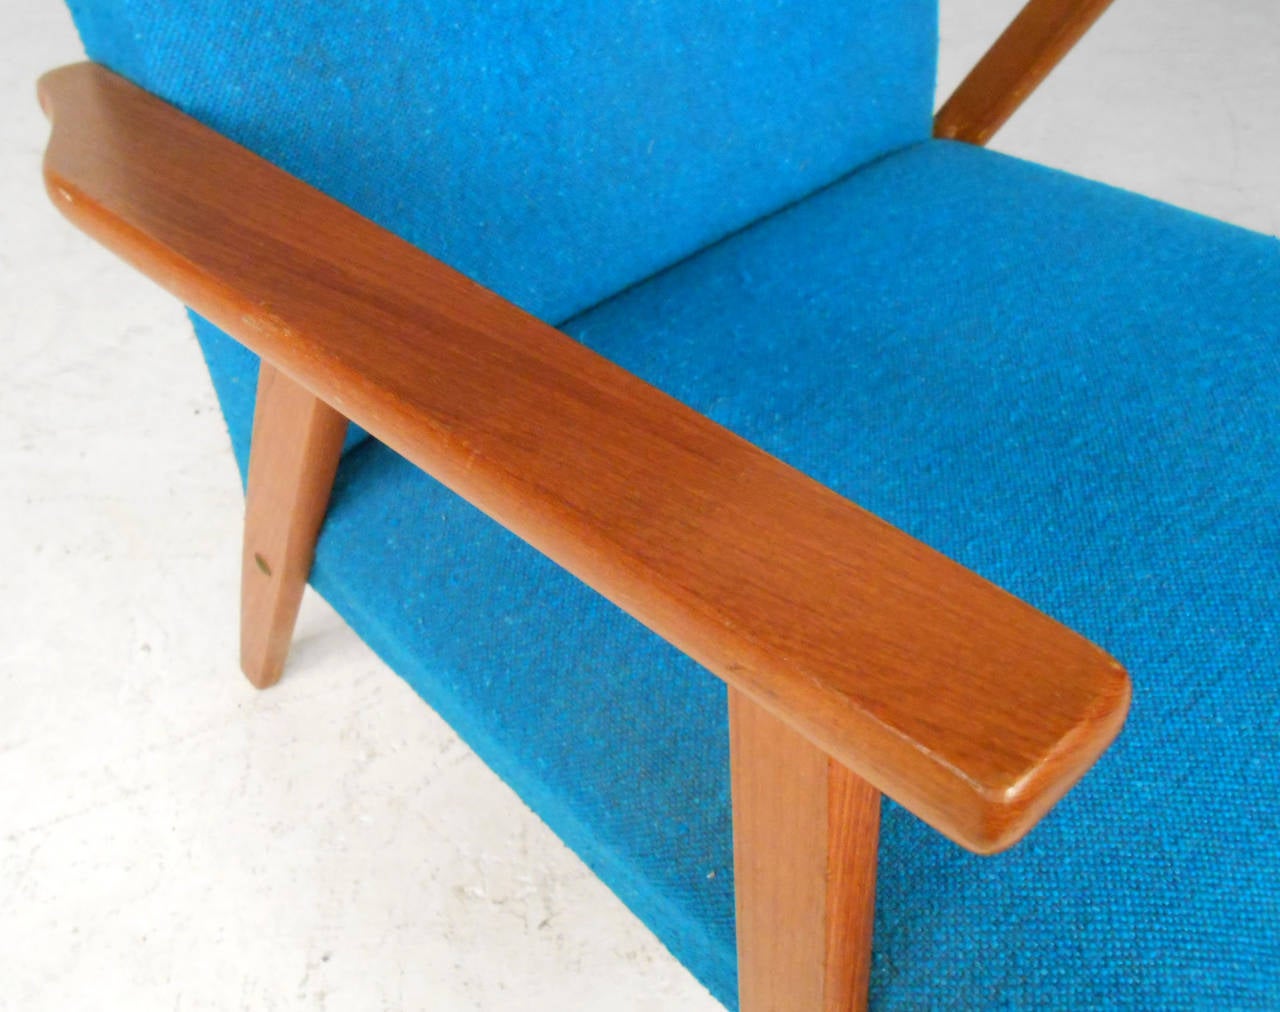  Mid-Century Scandinavian Modern Highback Armchair In Good Condition For Sale In Brooklyn, NY